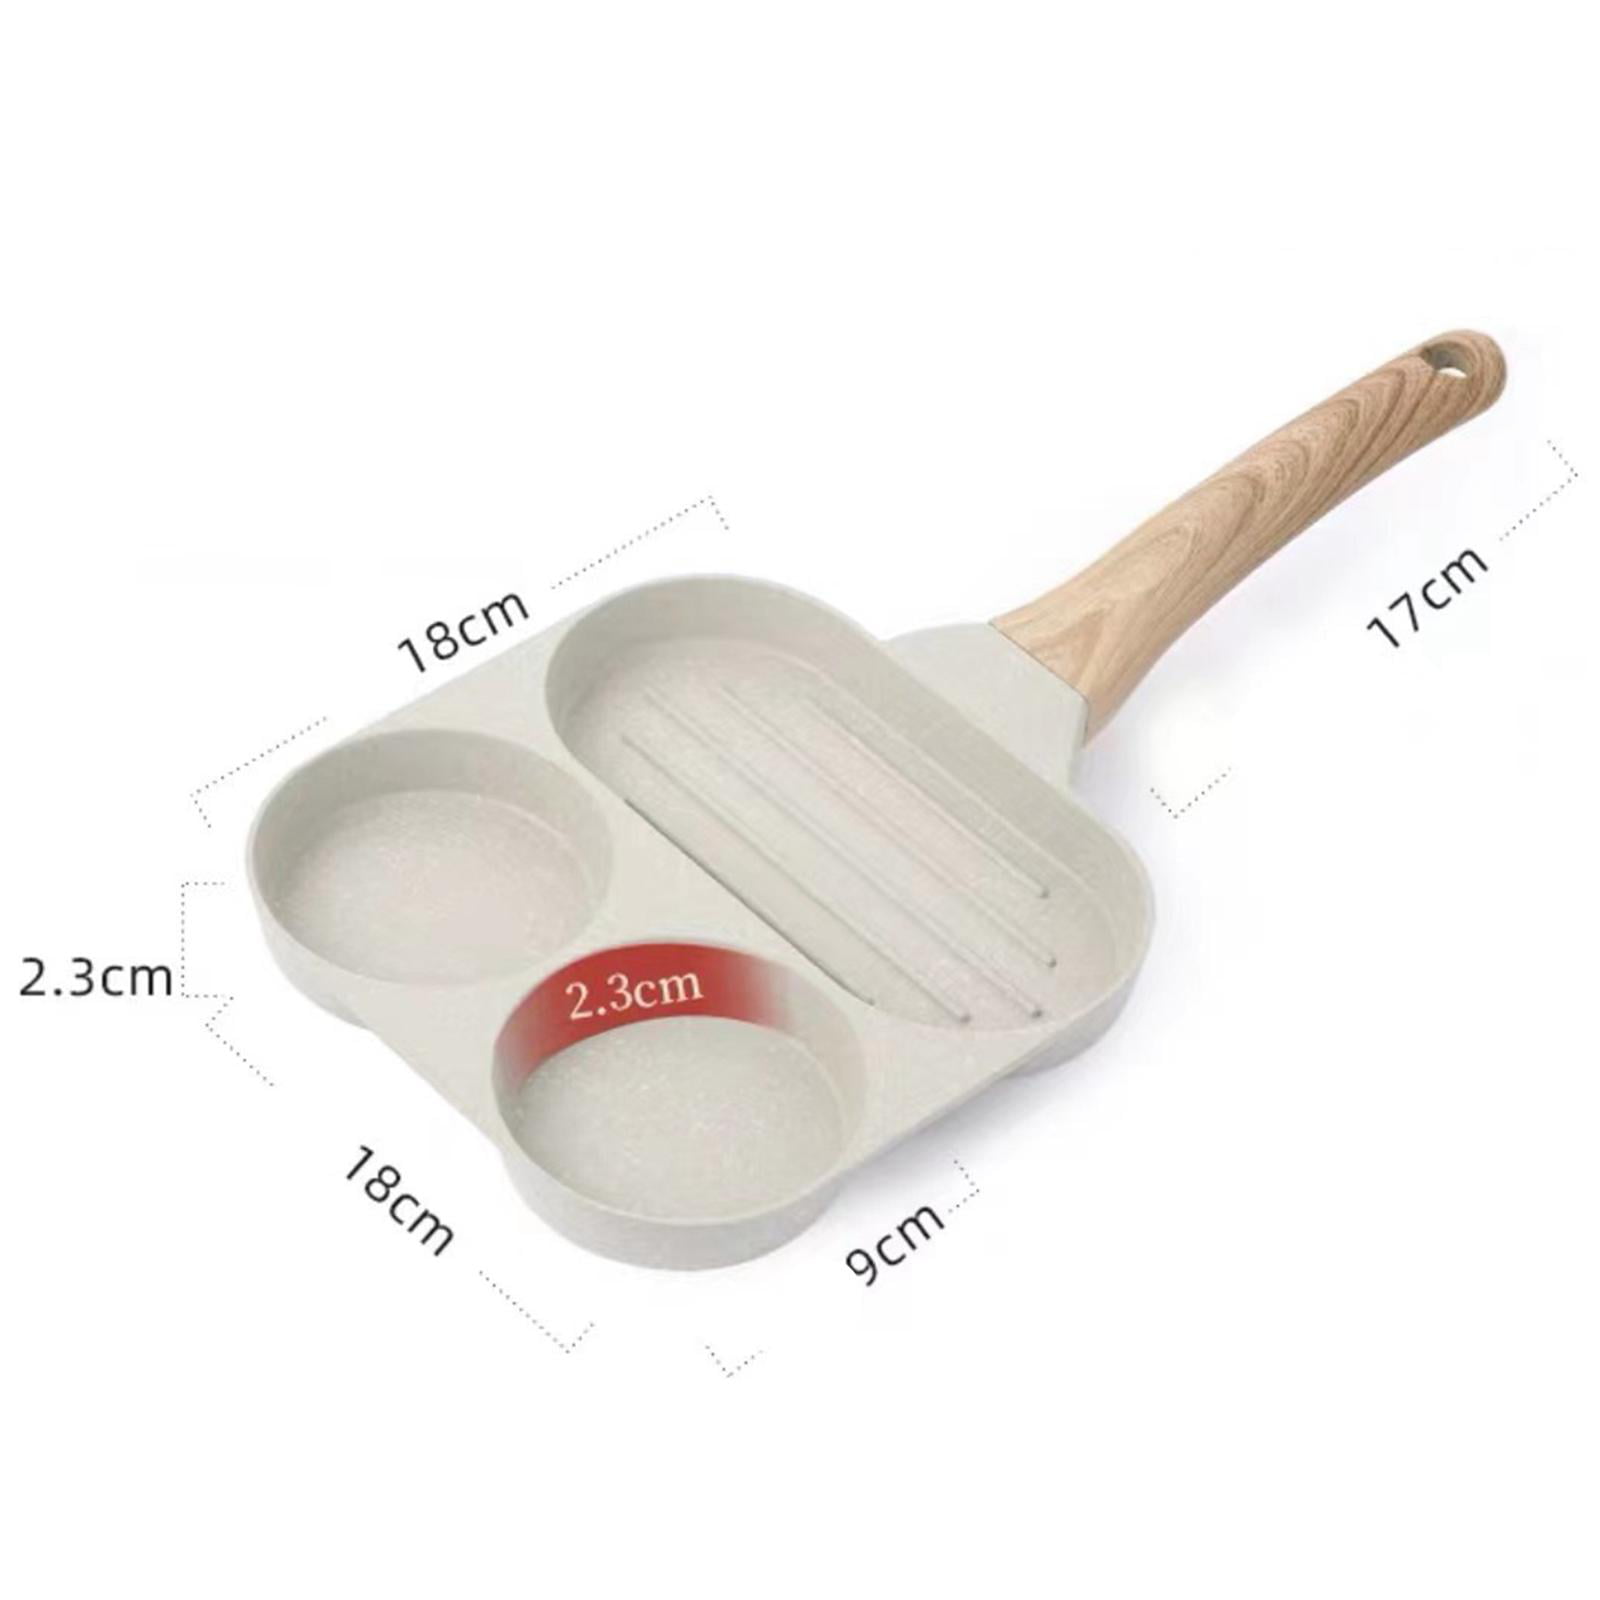 CENAP Divided Frying Pan All in One, 3-in-1 Cast Iron Multi-Section  Grill/Breakfast Skillet, Egg Mini Pancake Frying Pan with 2 Hole, Suitable  for Gas